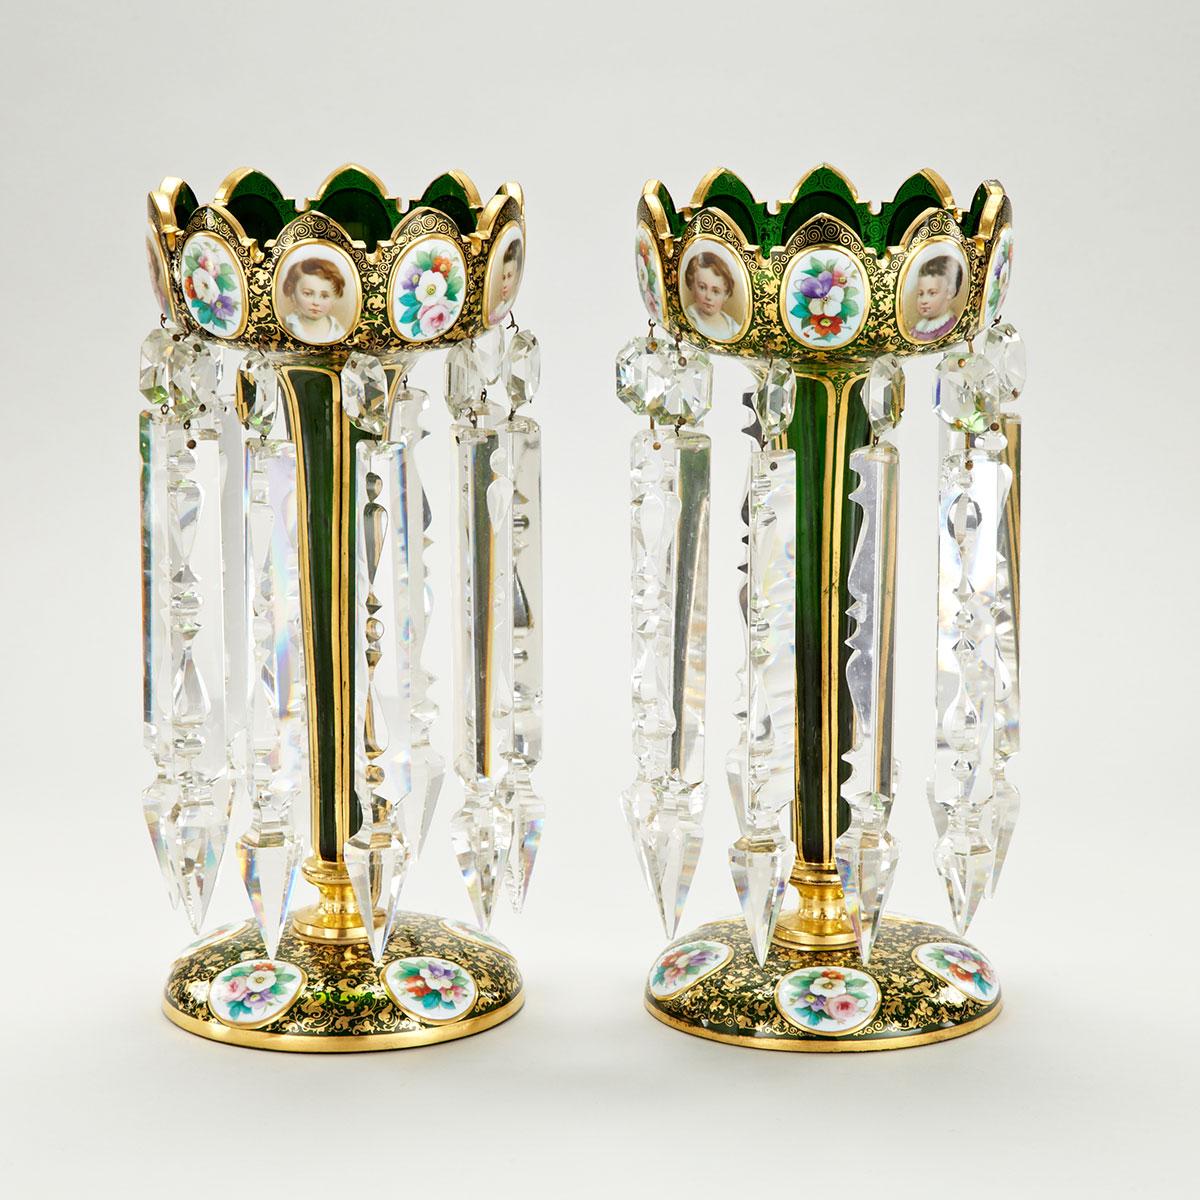 Pair of Bohemian Overlaid and Enameled Green Glass Lustres, late 19th/early 20th century